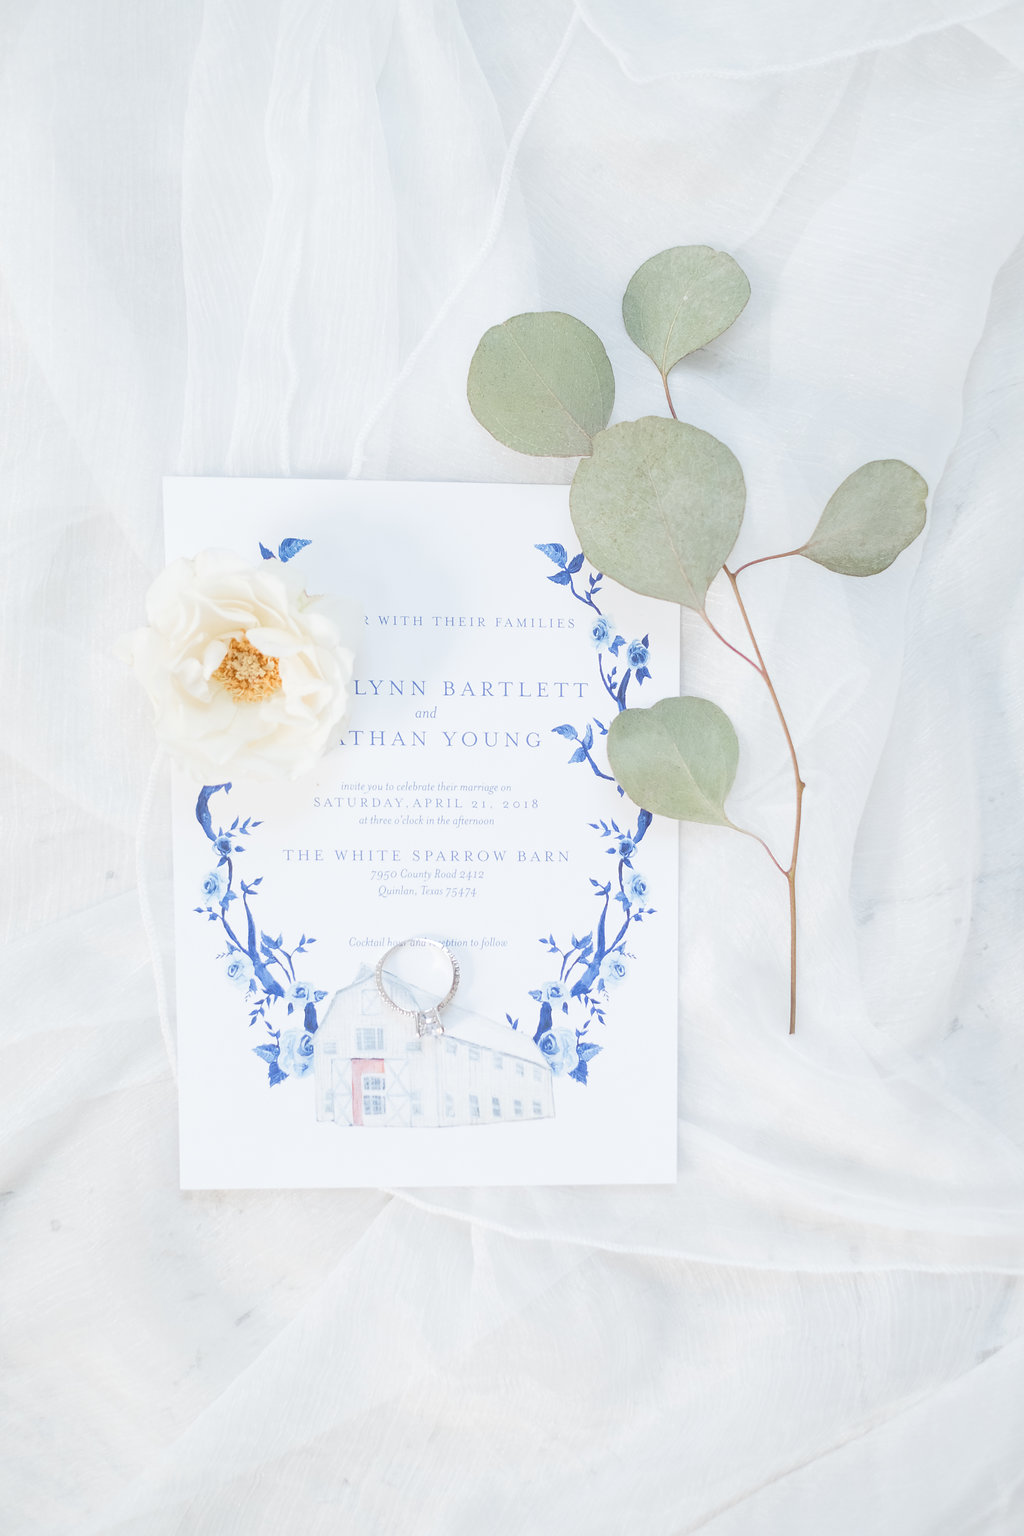 A professional image of the front of a formal wedding invitation card featuring blue and white flowers and barn painting Motif.